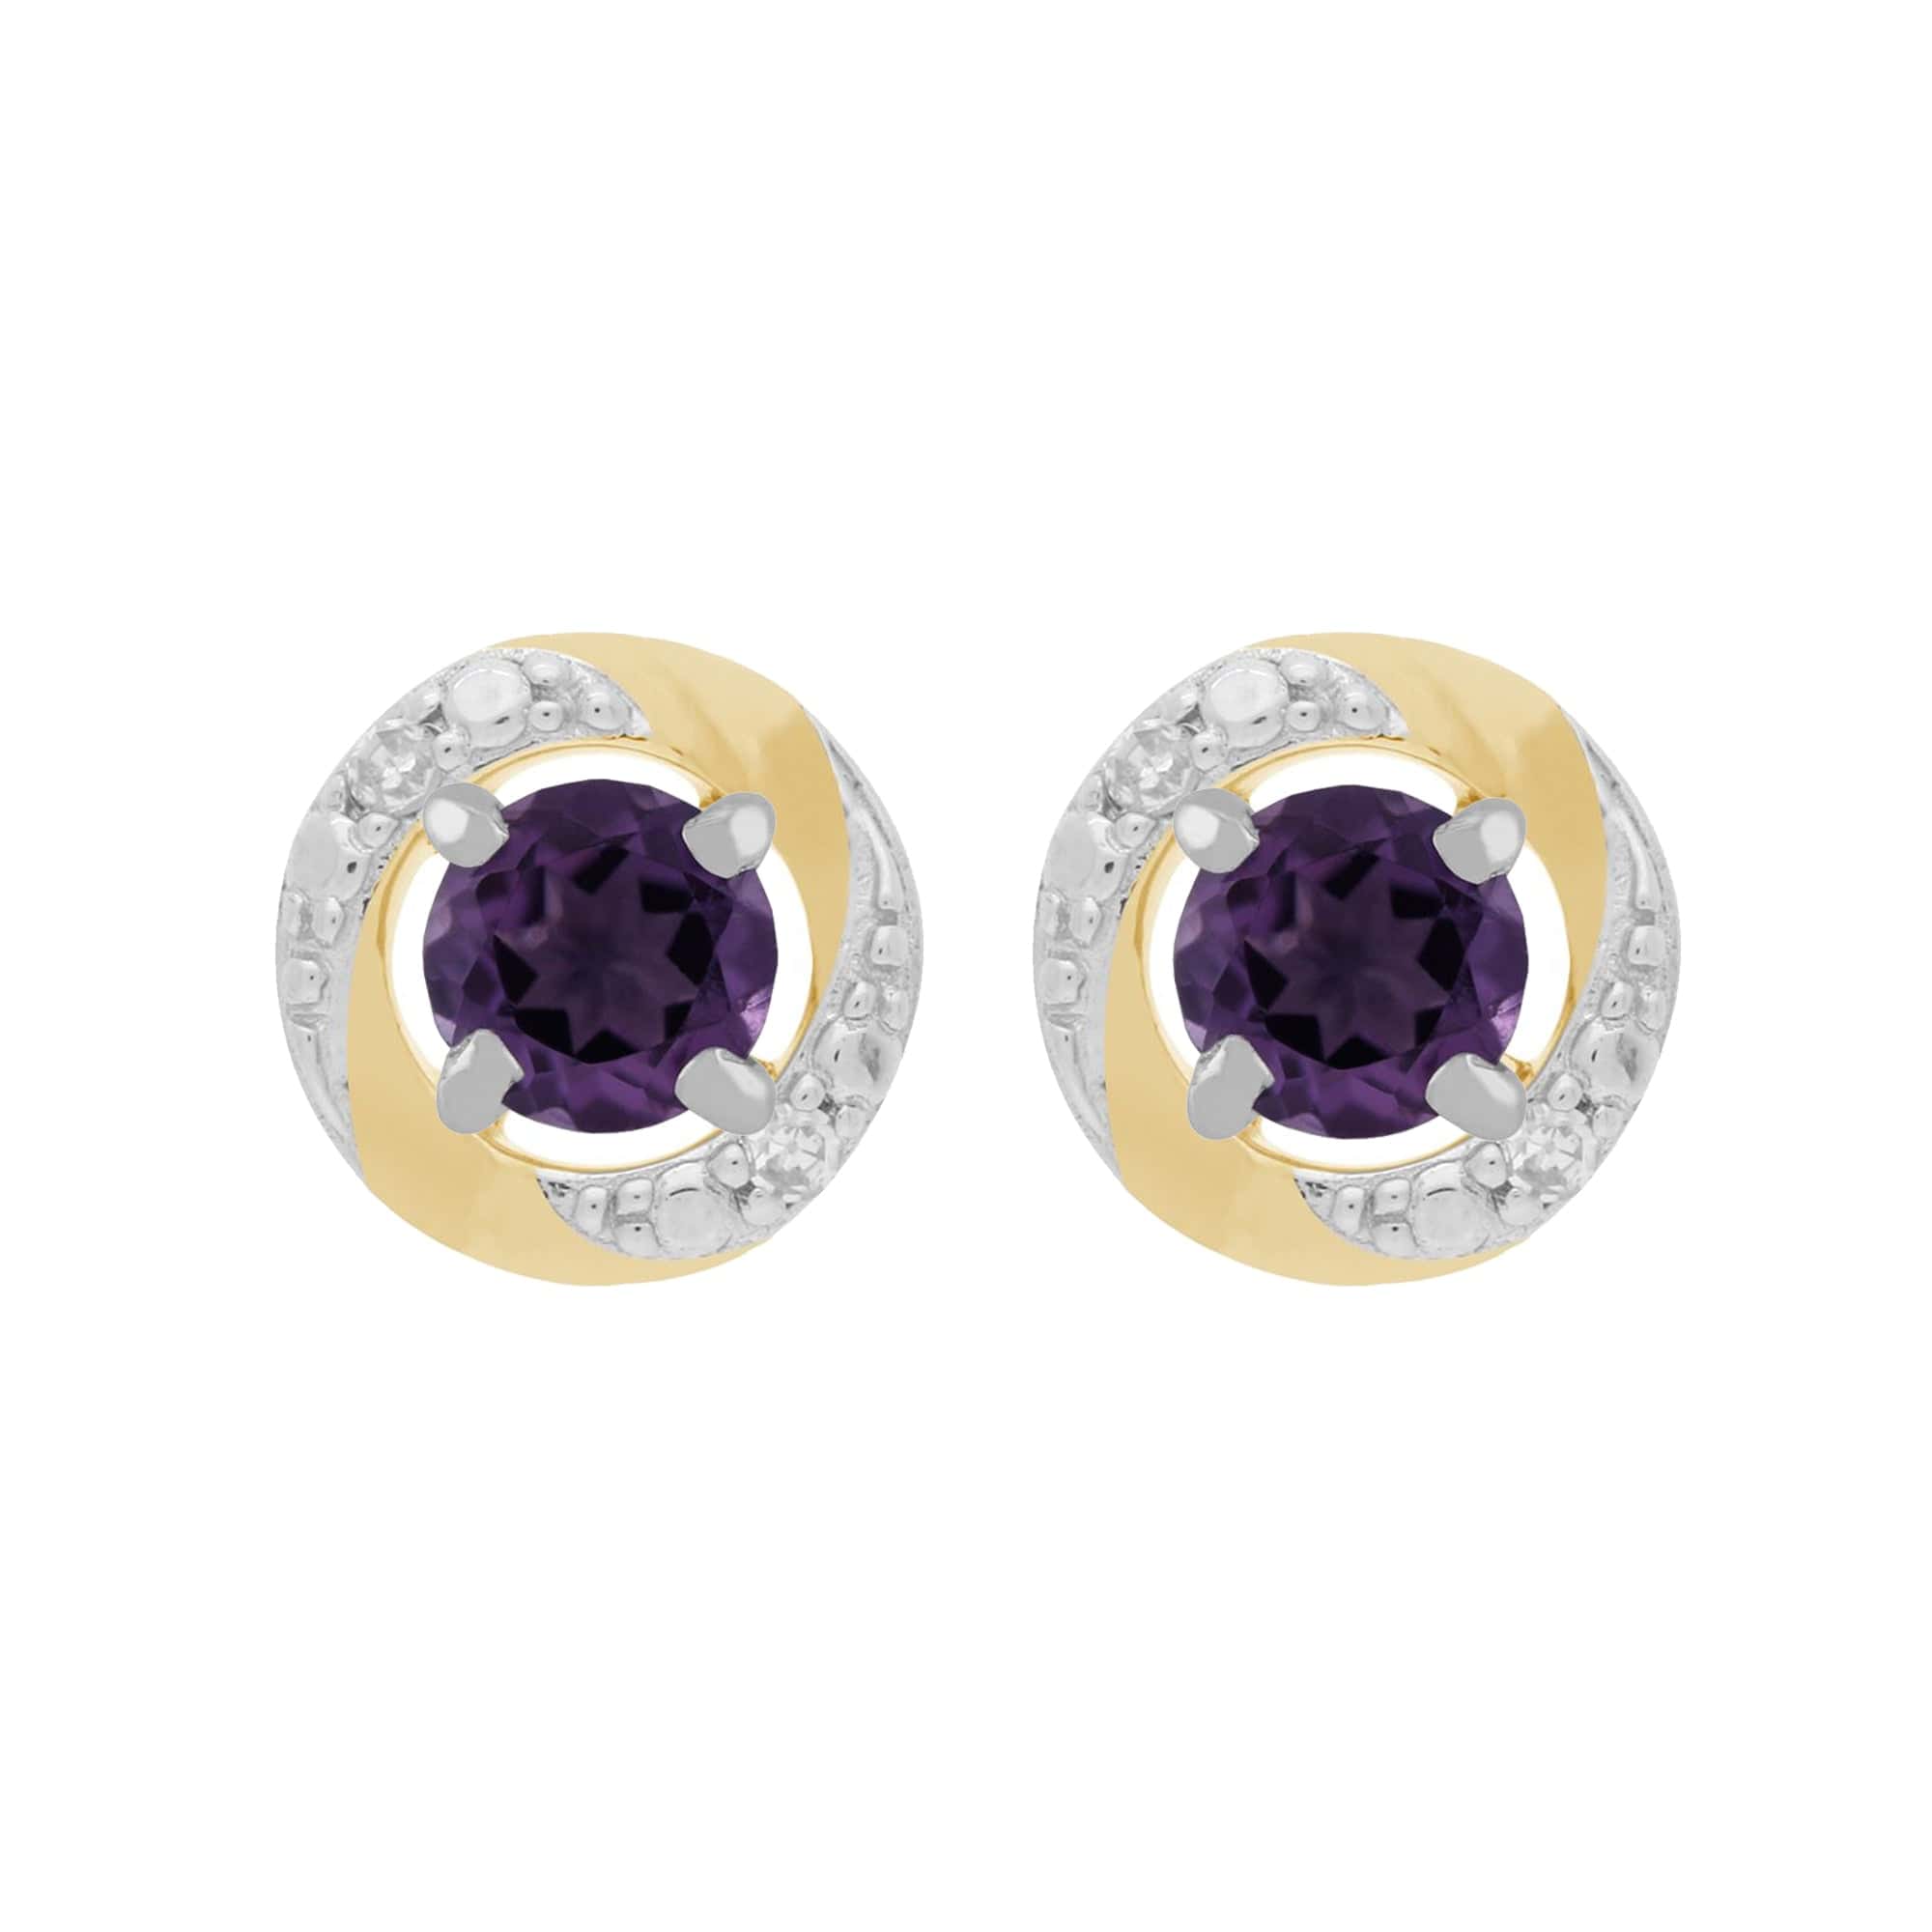 11612-191E0374019 9ct White Gold Amethyst Stud Earrings with Detachable Diamond Halo Ear Jacket in 9ct Yellow Gold 1